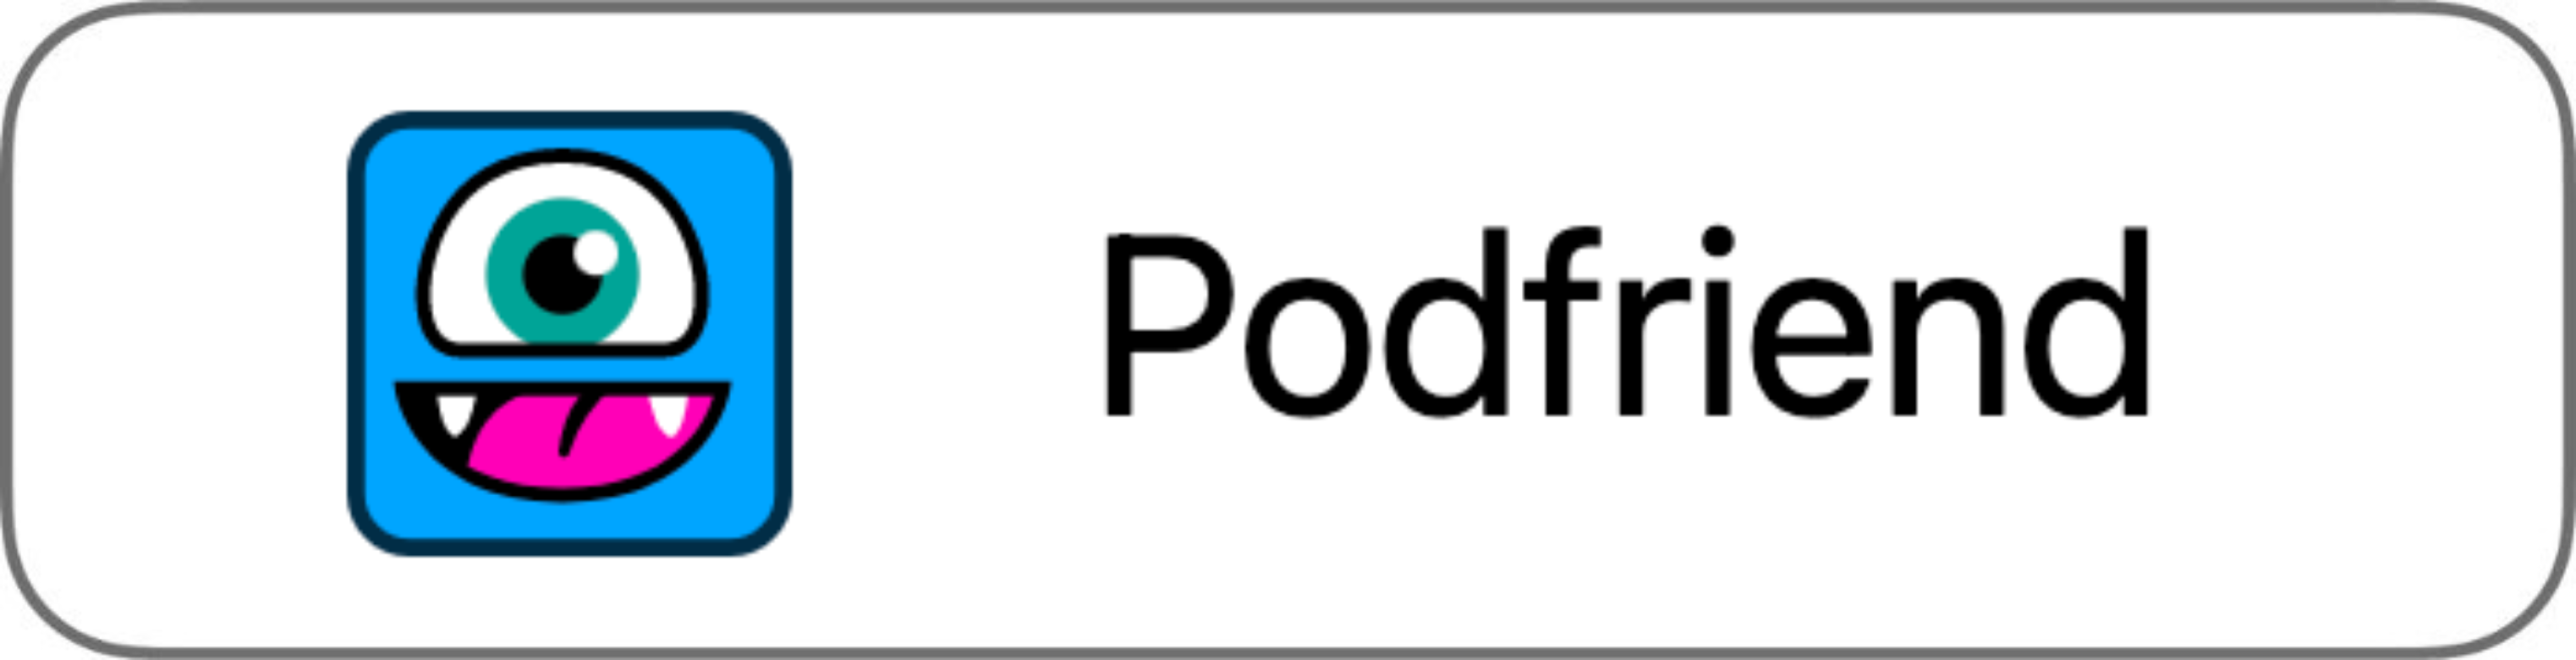 Podfriend - The Employee Advocacy & Influence Podcast by DSMN8